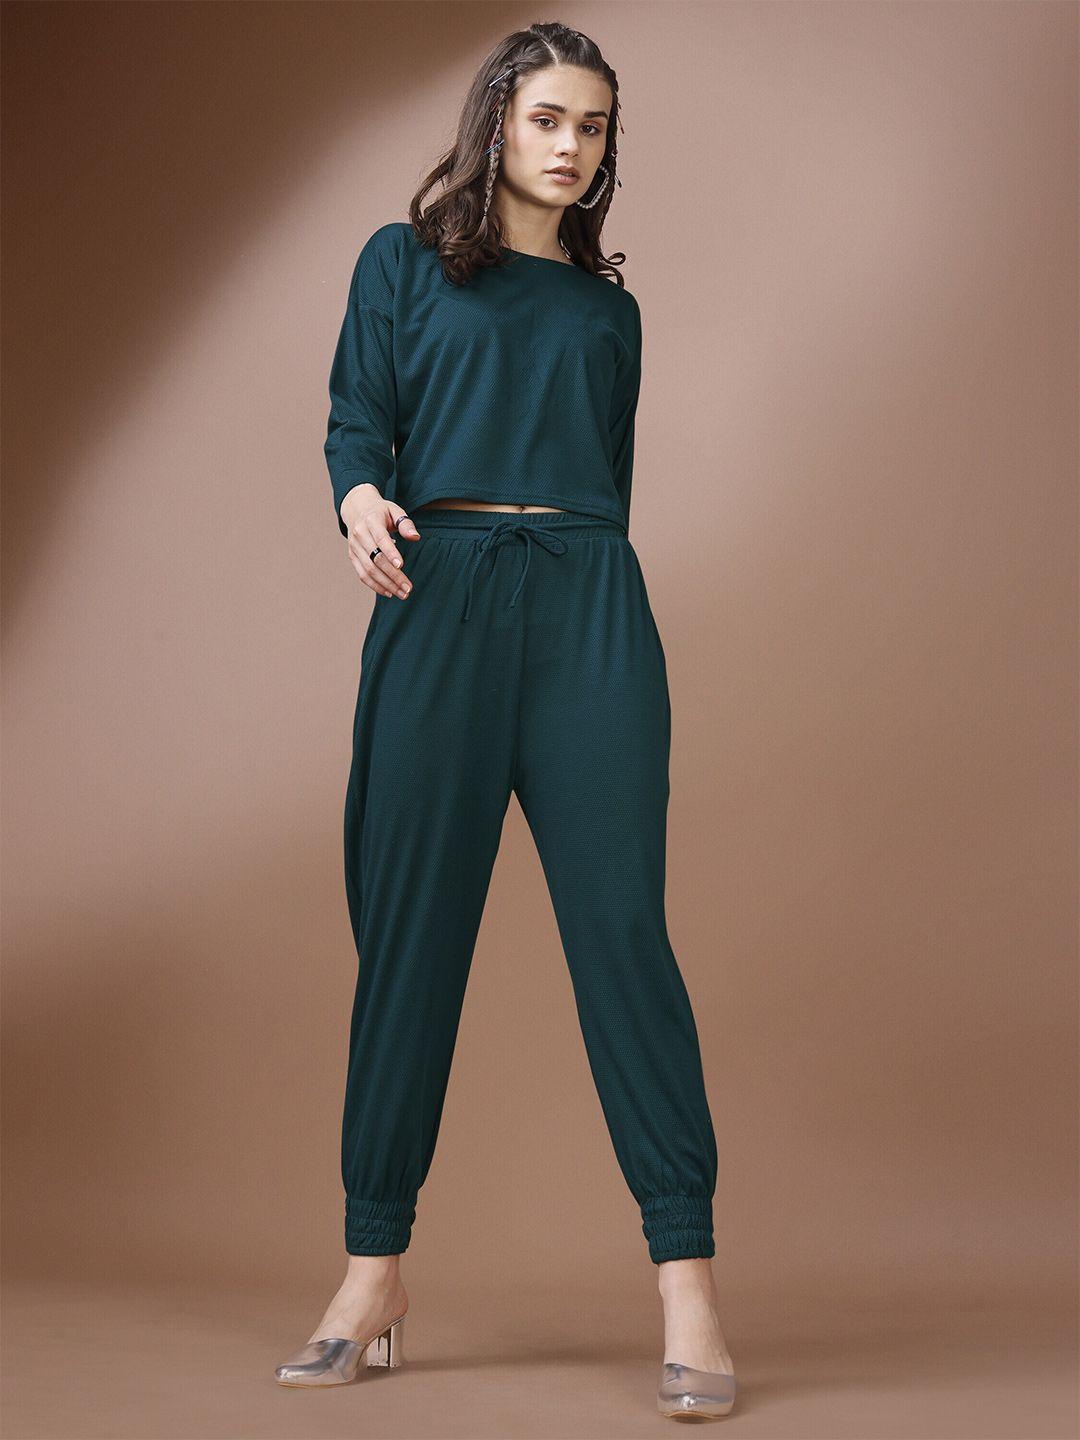 sidyal knitted round neck top & joggers co-ord set